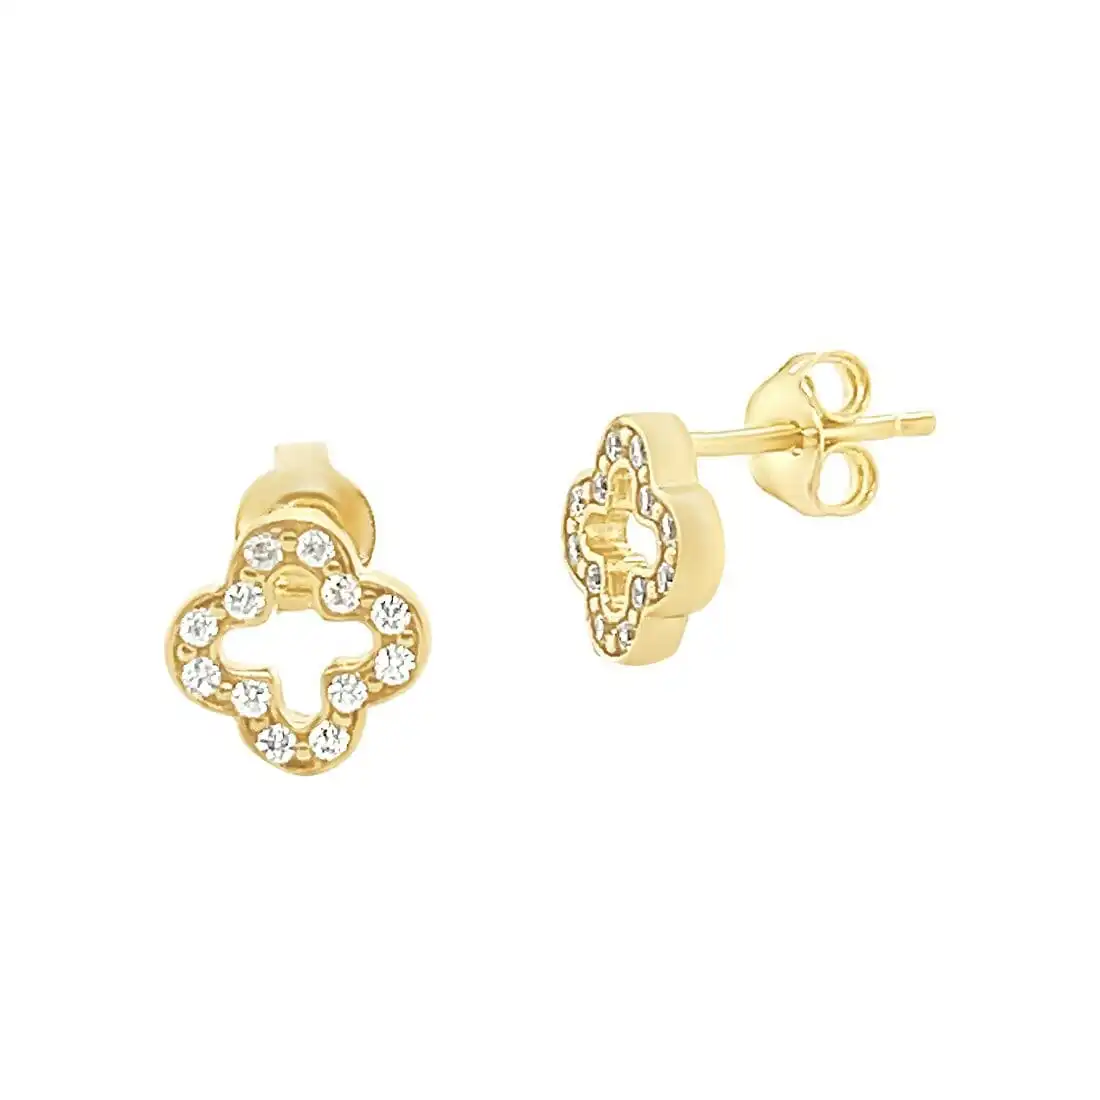 Clover Stud Earrings in 9ct Yellow Gold Silver Infused with Cubic Zirconia